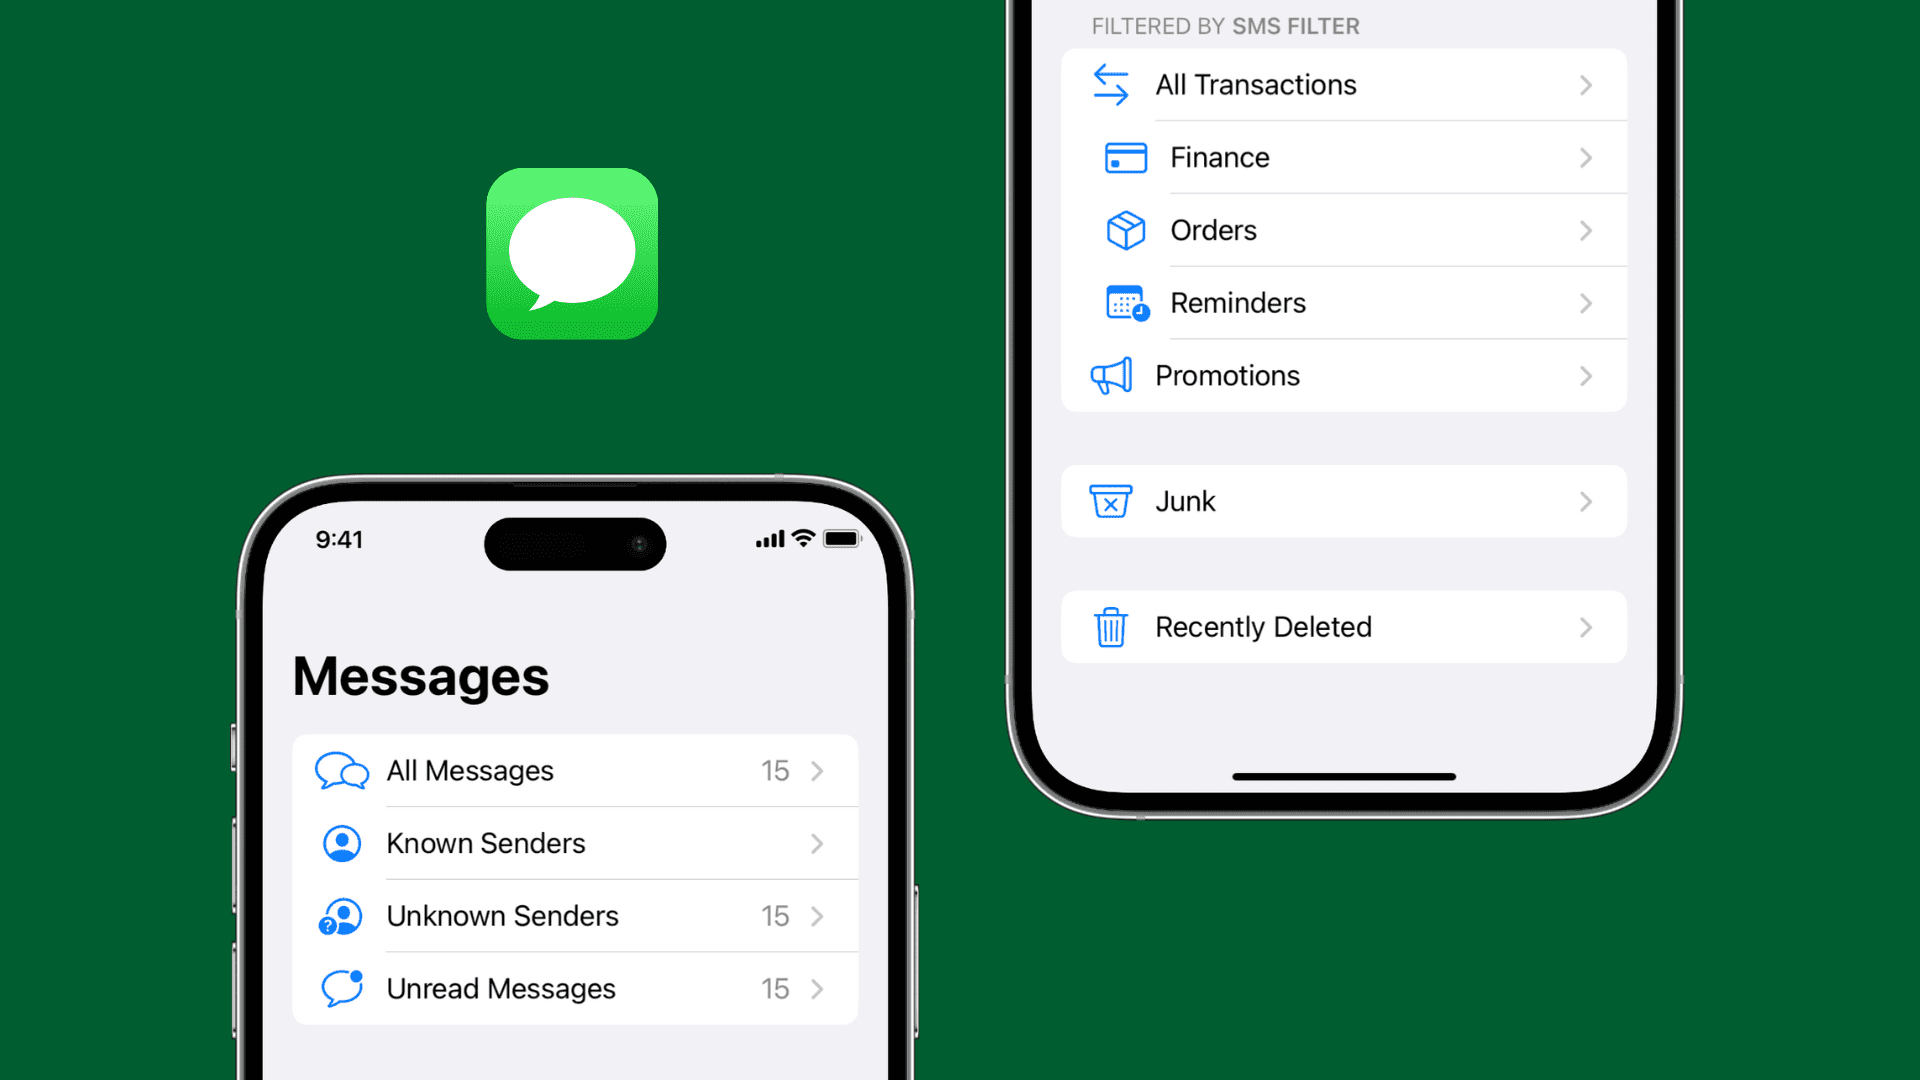 All message filters inside the iPhone Messages app